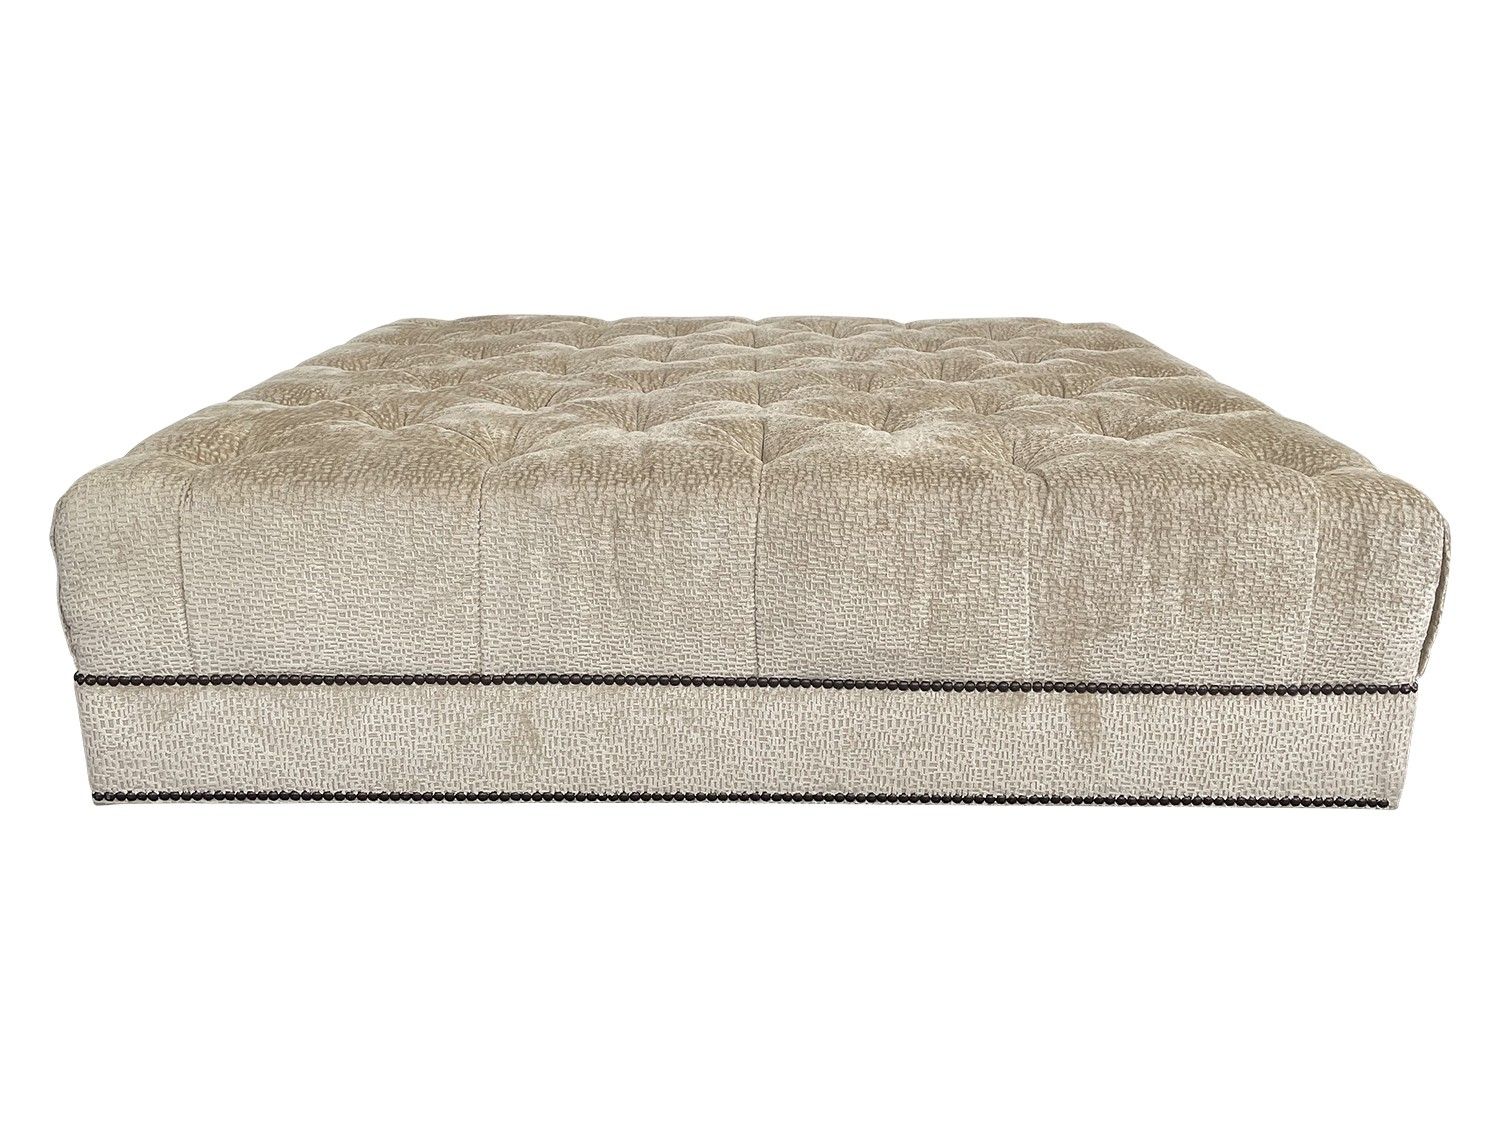 Thomas Pheasant For Baker Furniture Square Tufted Paris Ottoman | The Local  Vault Intended For Beige Thomas Ottomans (View 13 of 15)